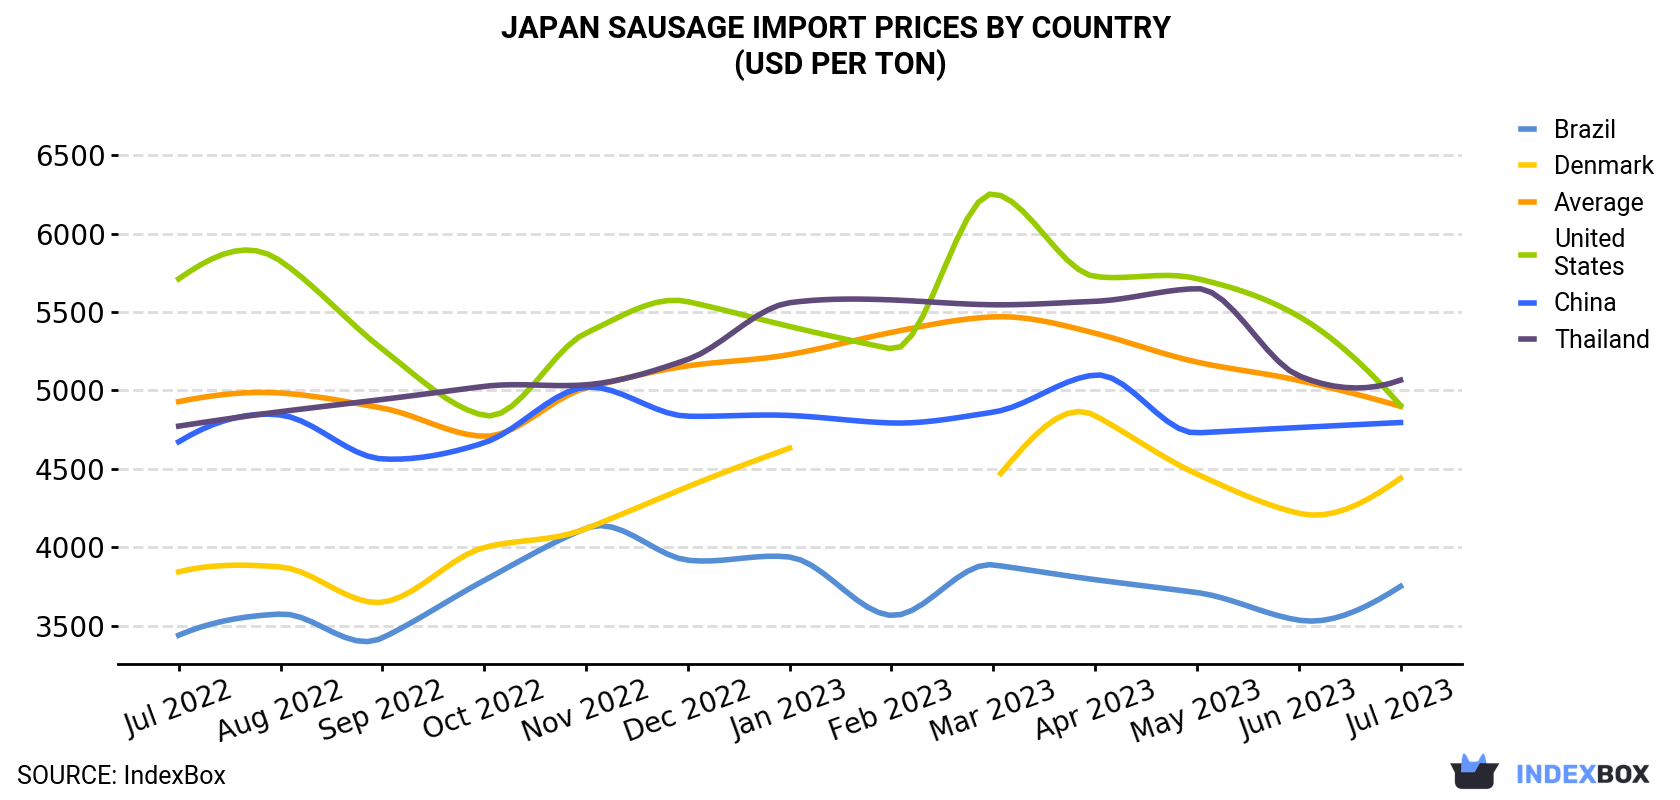 Japan Sausage Import Prices By Country (USD Per Ton)